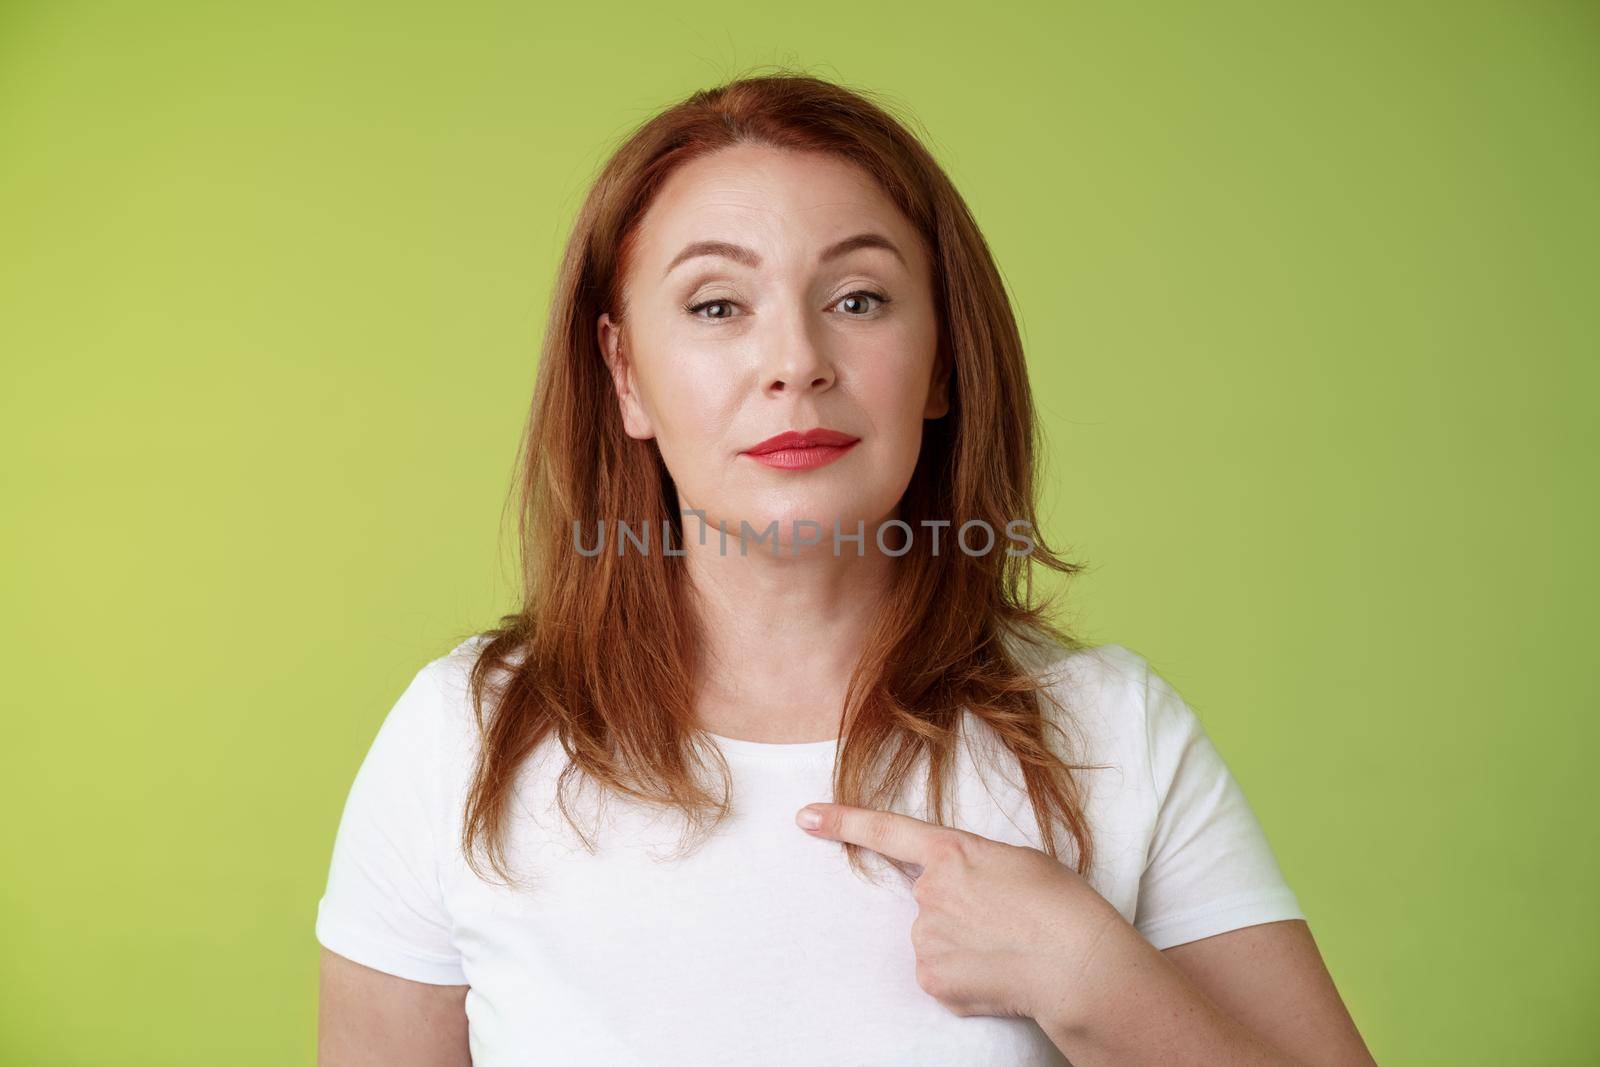 Proud mom pointing herself. Motivated confident redhead assertive middle-aged woman indicating chest volunteering bragging own abilities achievements look camera self-assured green background.